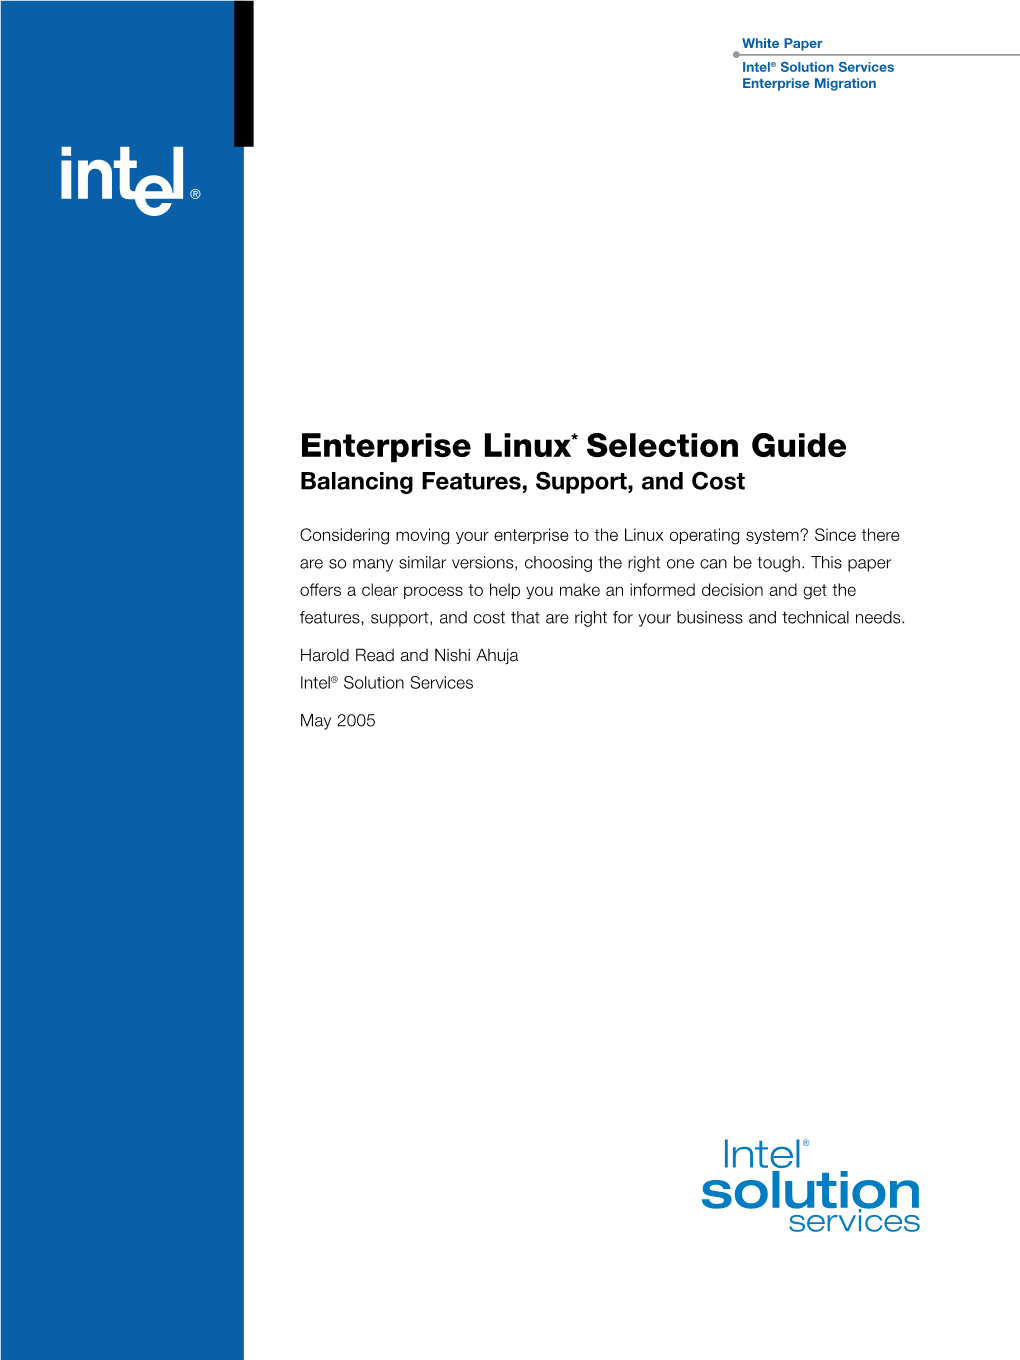 Enterprise Linux* Selection Guide Balancing Features, Support, and Cost